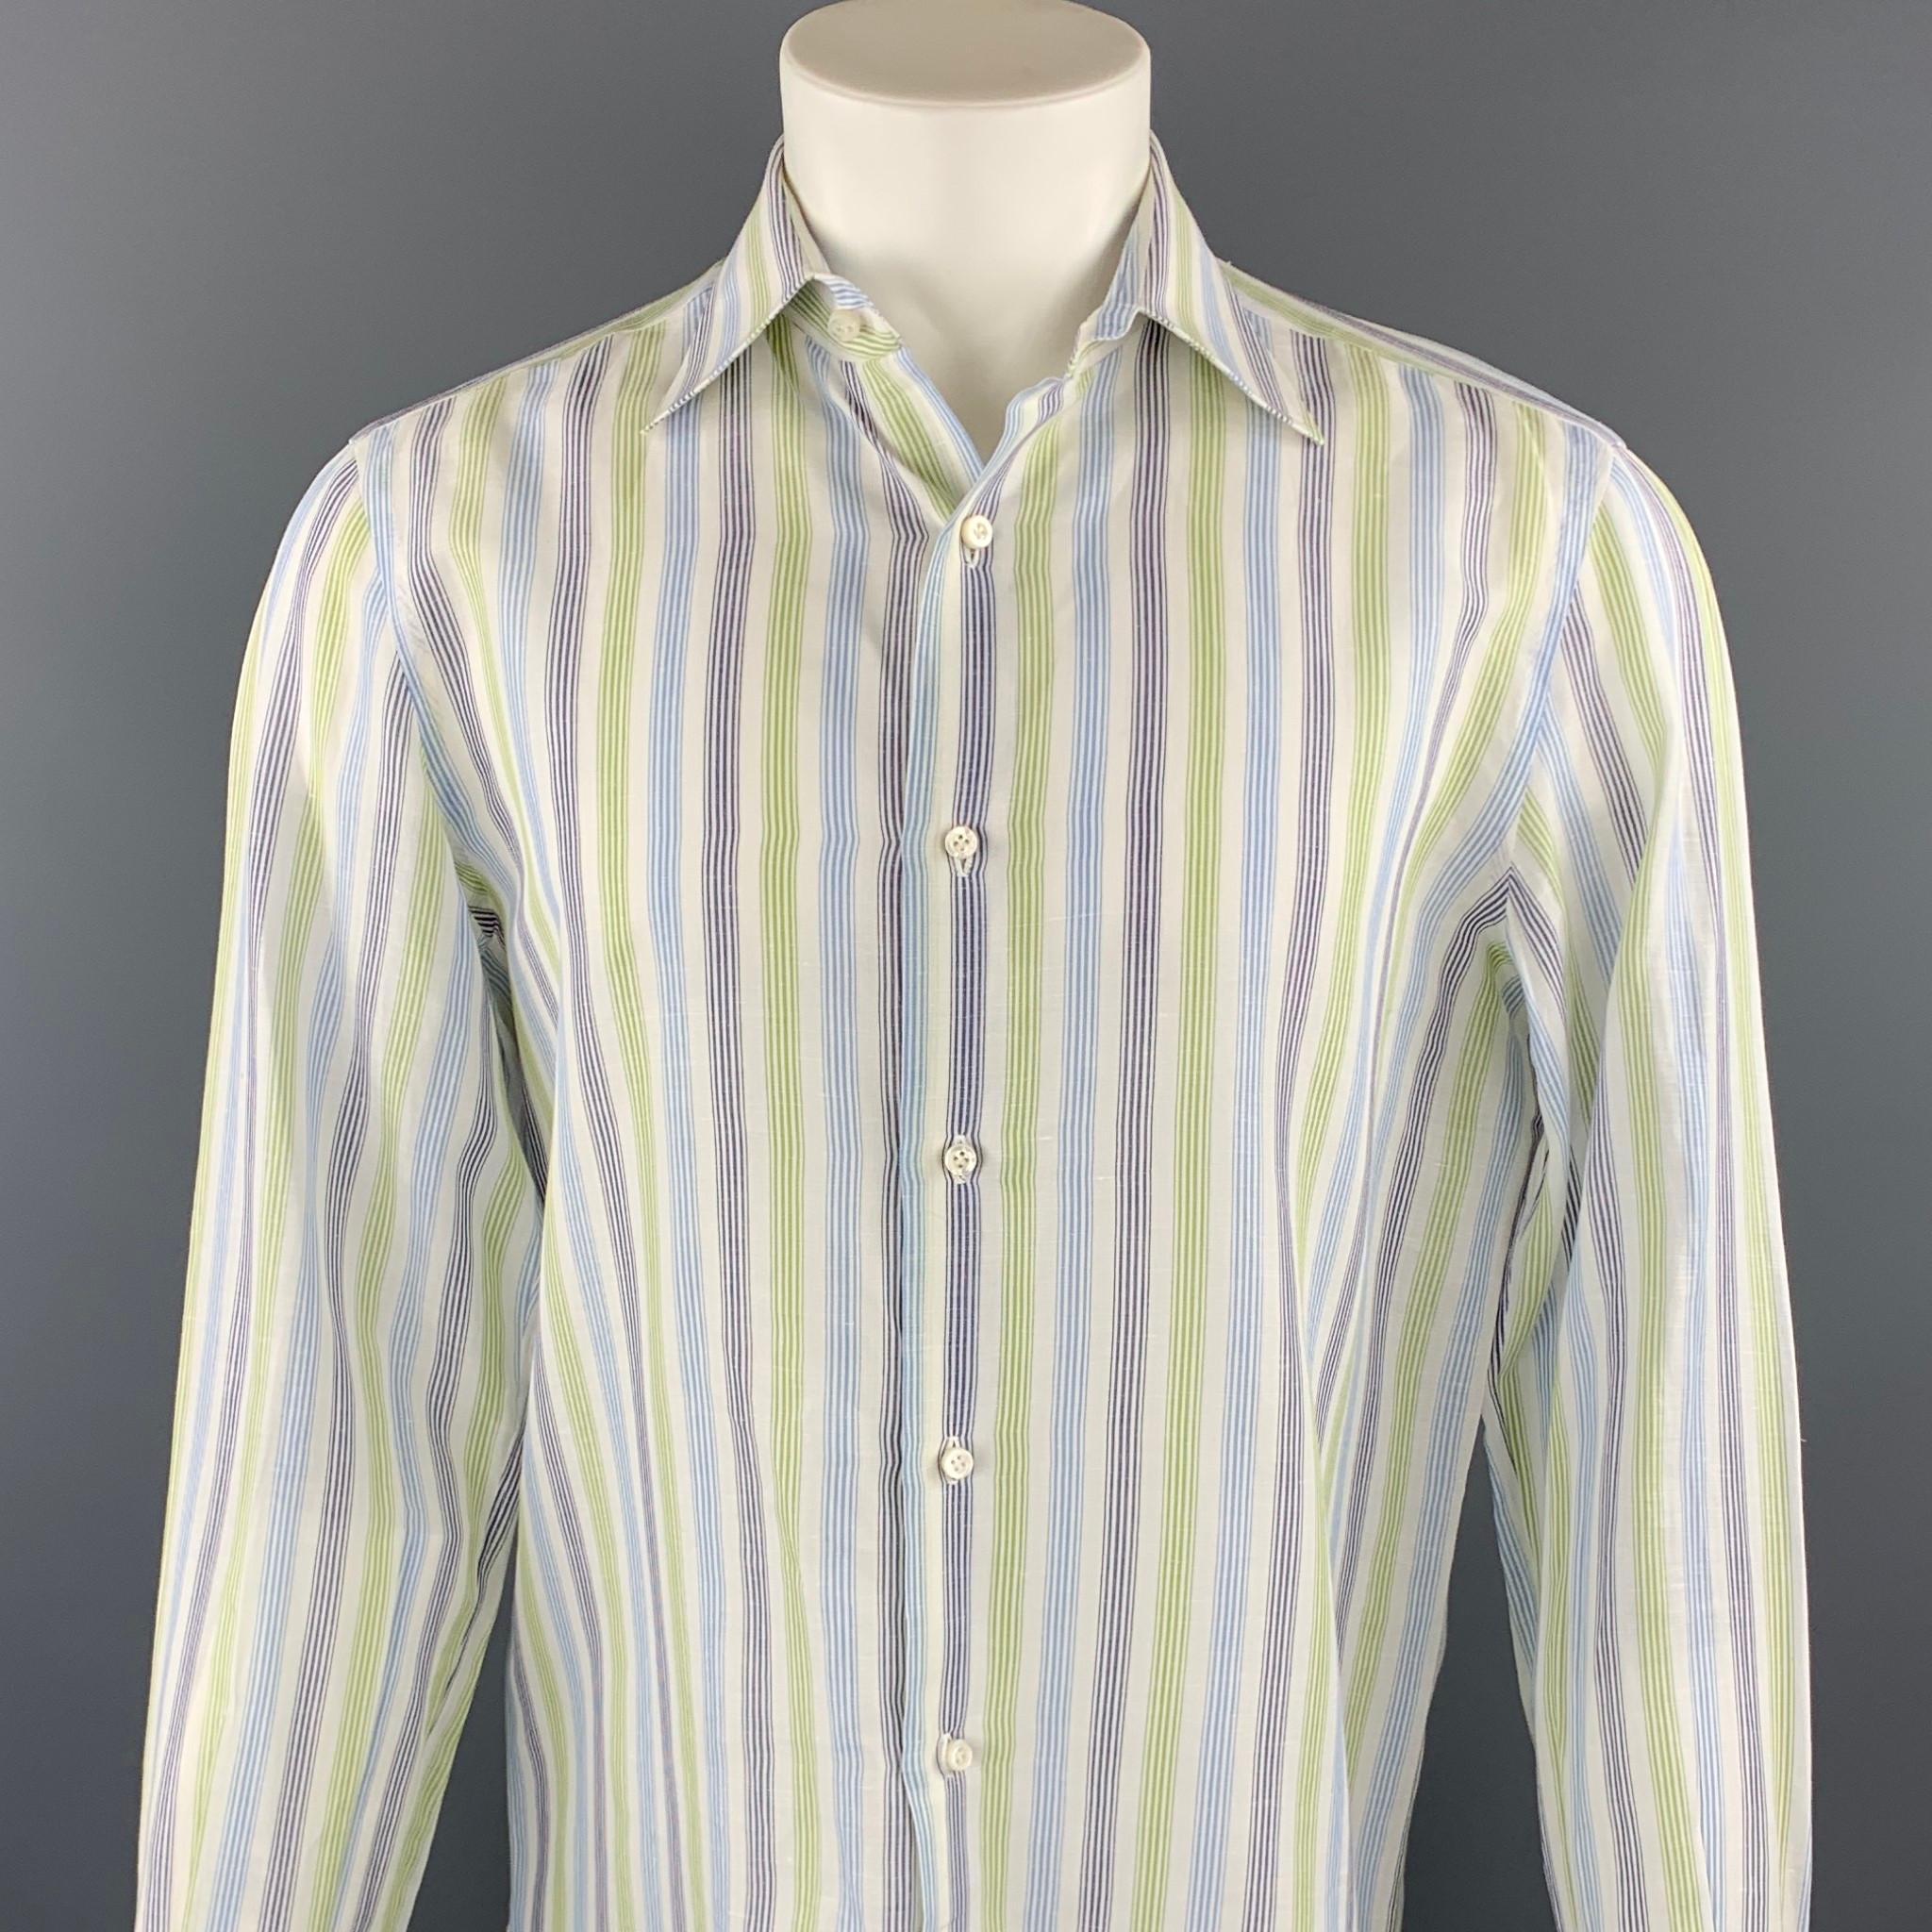 ISAIA long sleeve shirt comes in a navy & green plaid cotton featuring a button up style and a spread collar. Made in Italy.

Very Good Pre-Owned Condition.
Marked: 15.5/39

Measurements:

Shoulder: 17 in. 
Chest: 44 in. 
Sleeve: 26.5 in. 
Length: